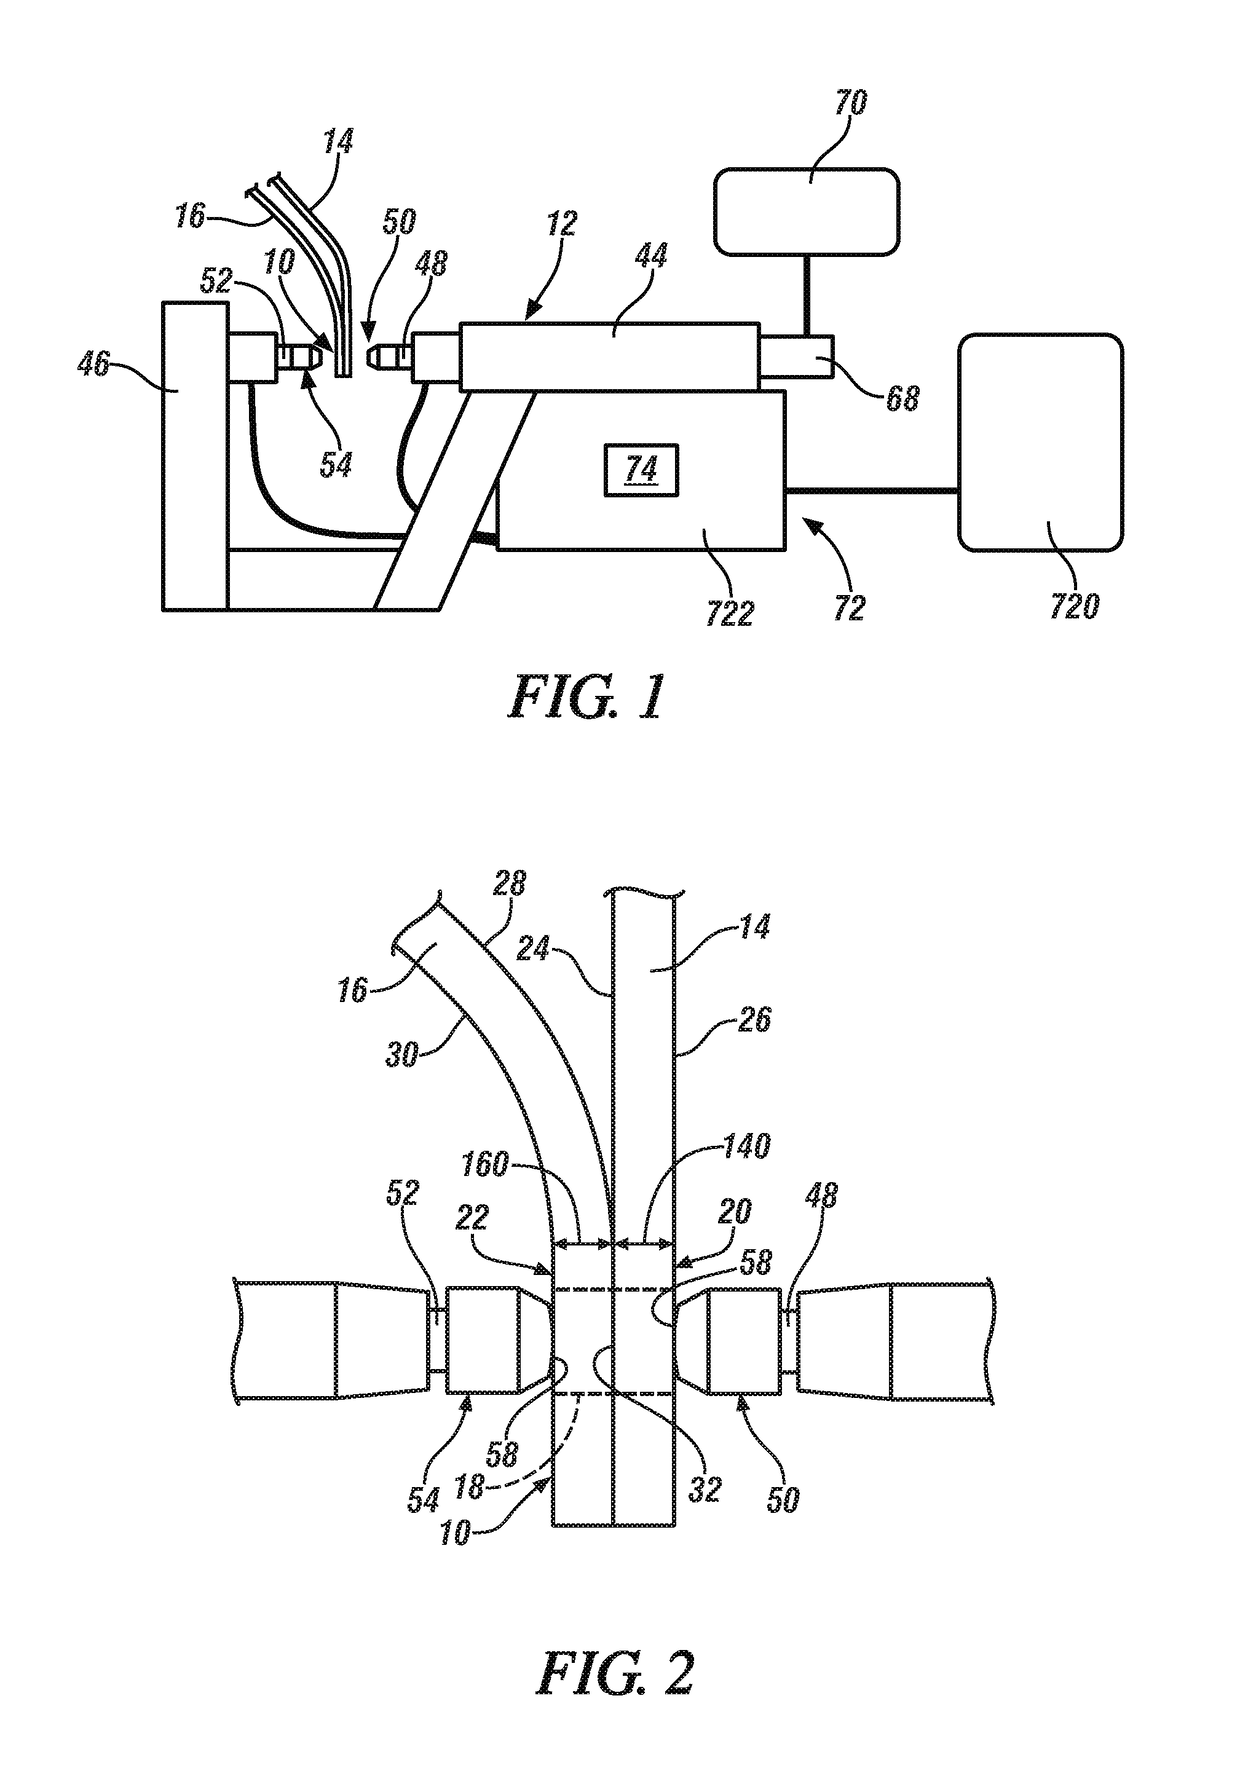 Power pulse method for controlling resistance weld nugget growth and properties during steel spot welding